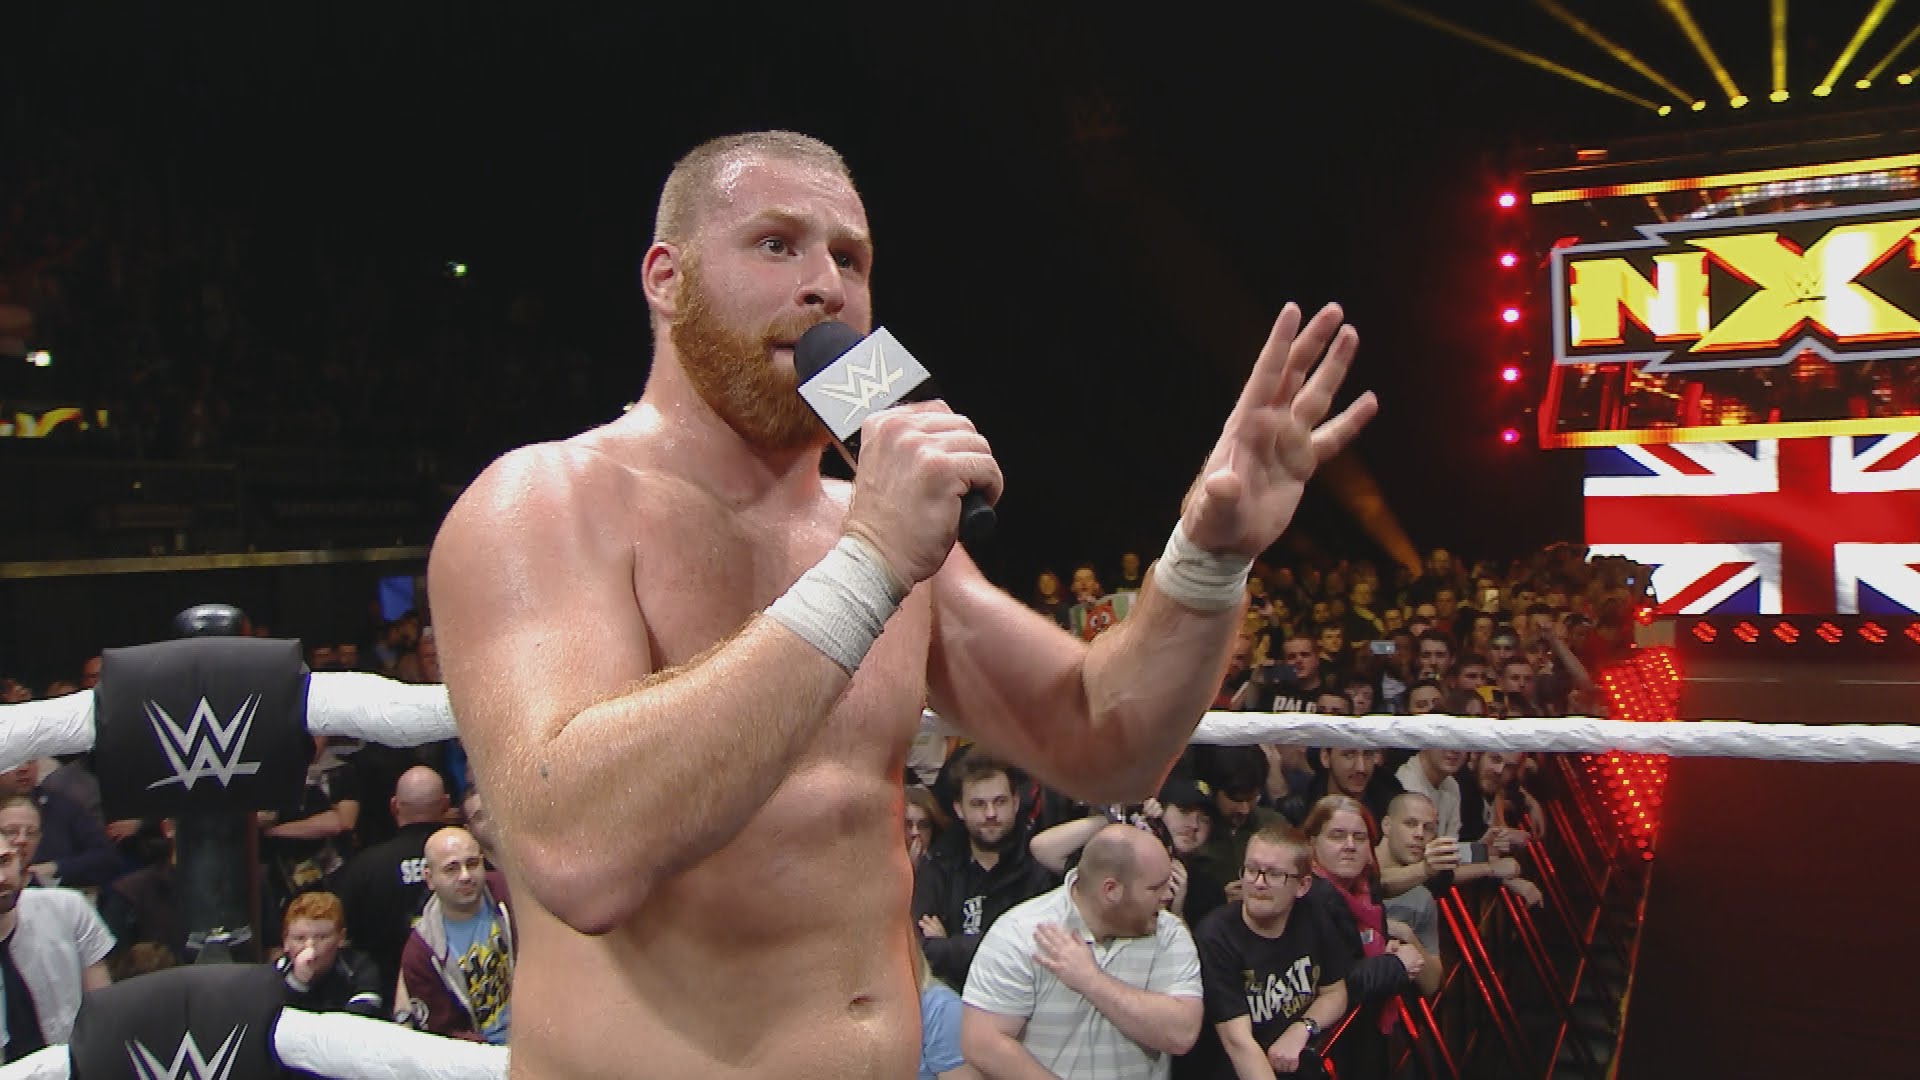 Sami Zayn might not have been a part of the NXT TakeOver: London card